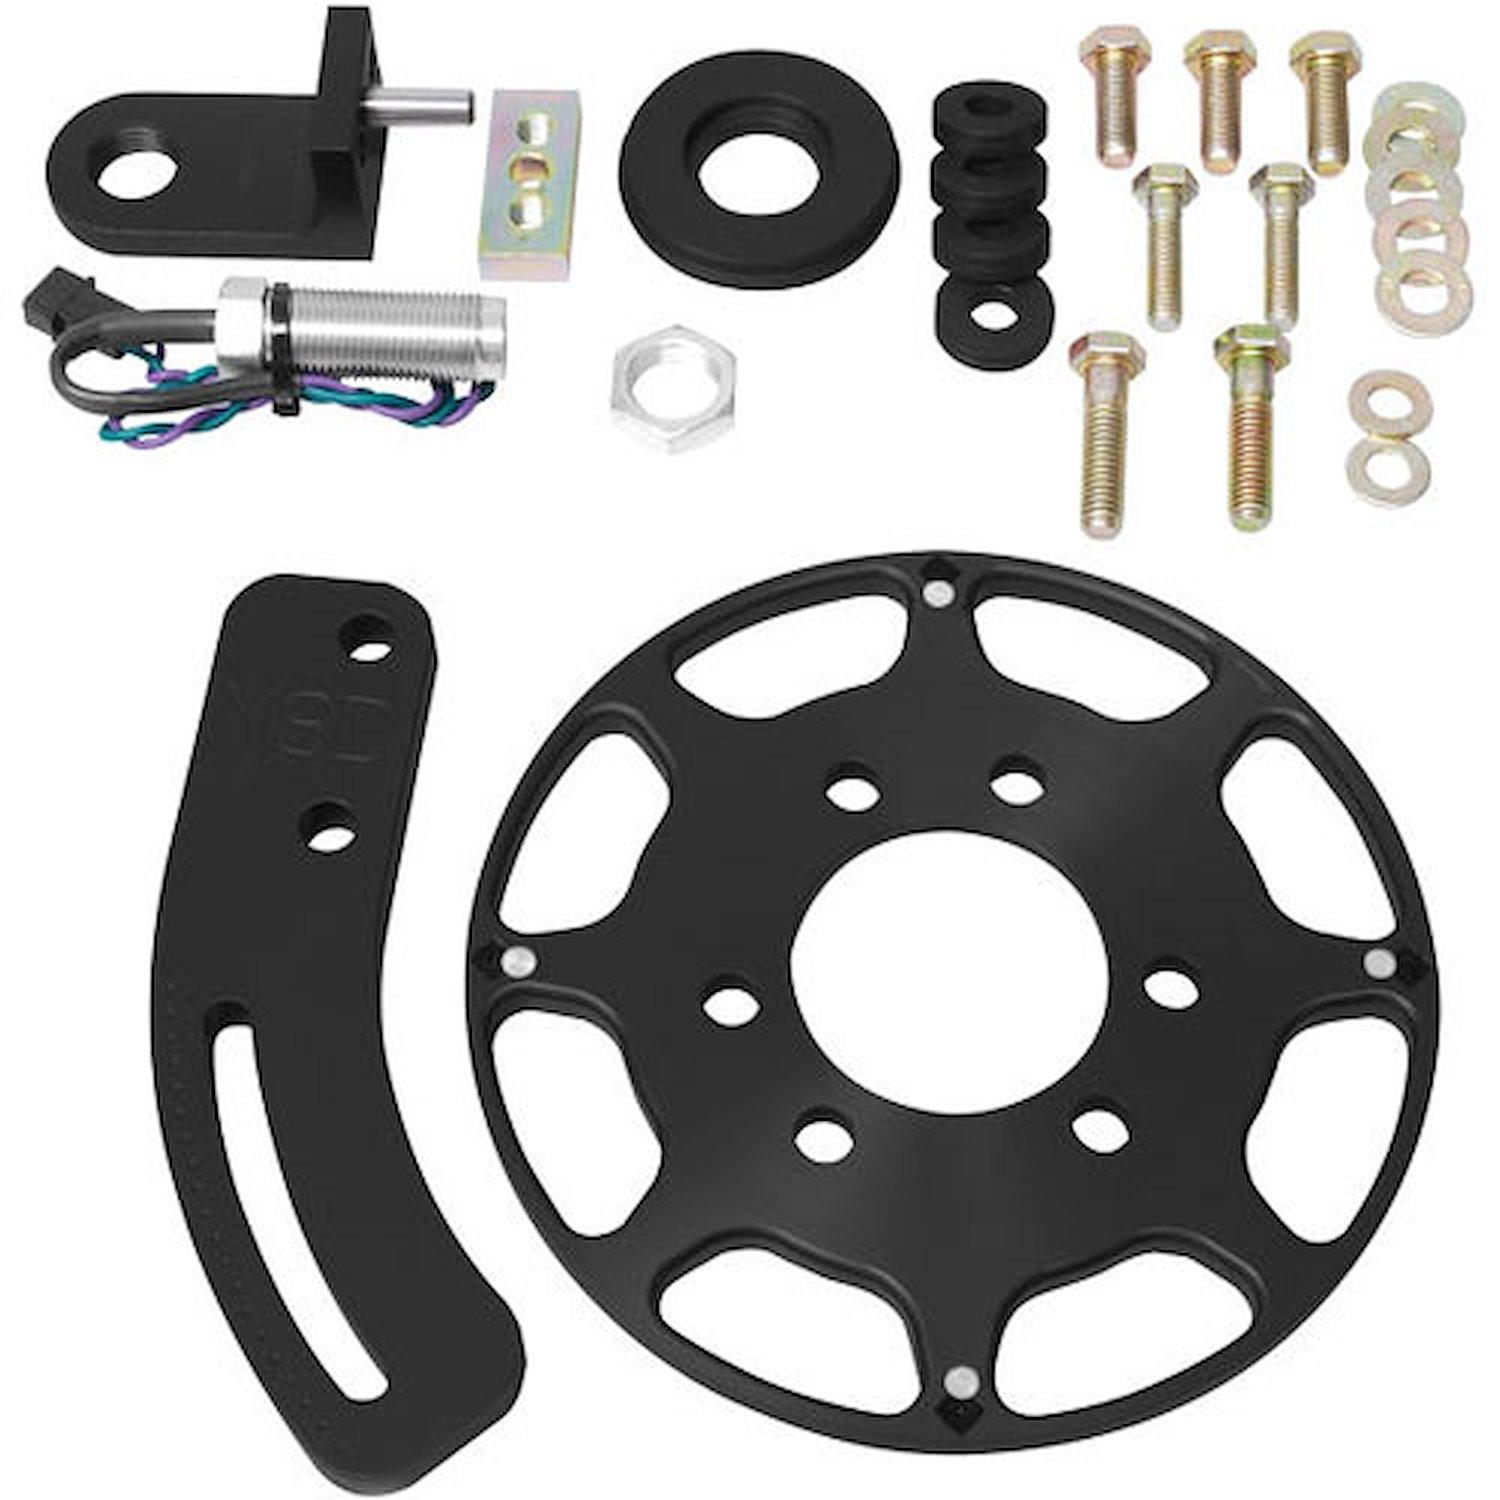 86103 Flying Magnet Crank Trigger Kit Small Block Chevy